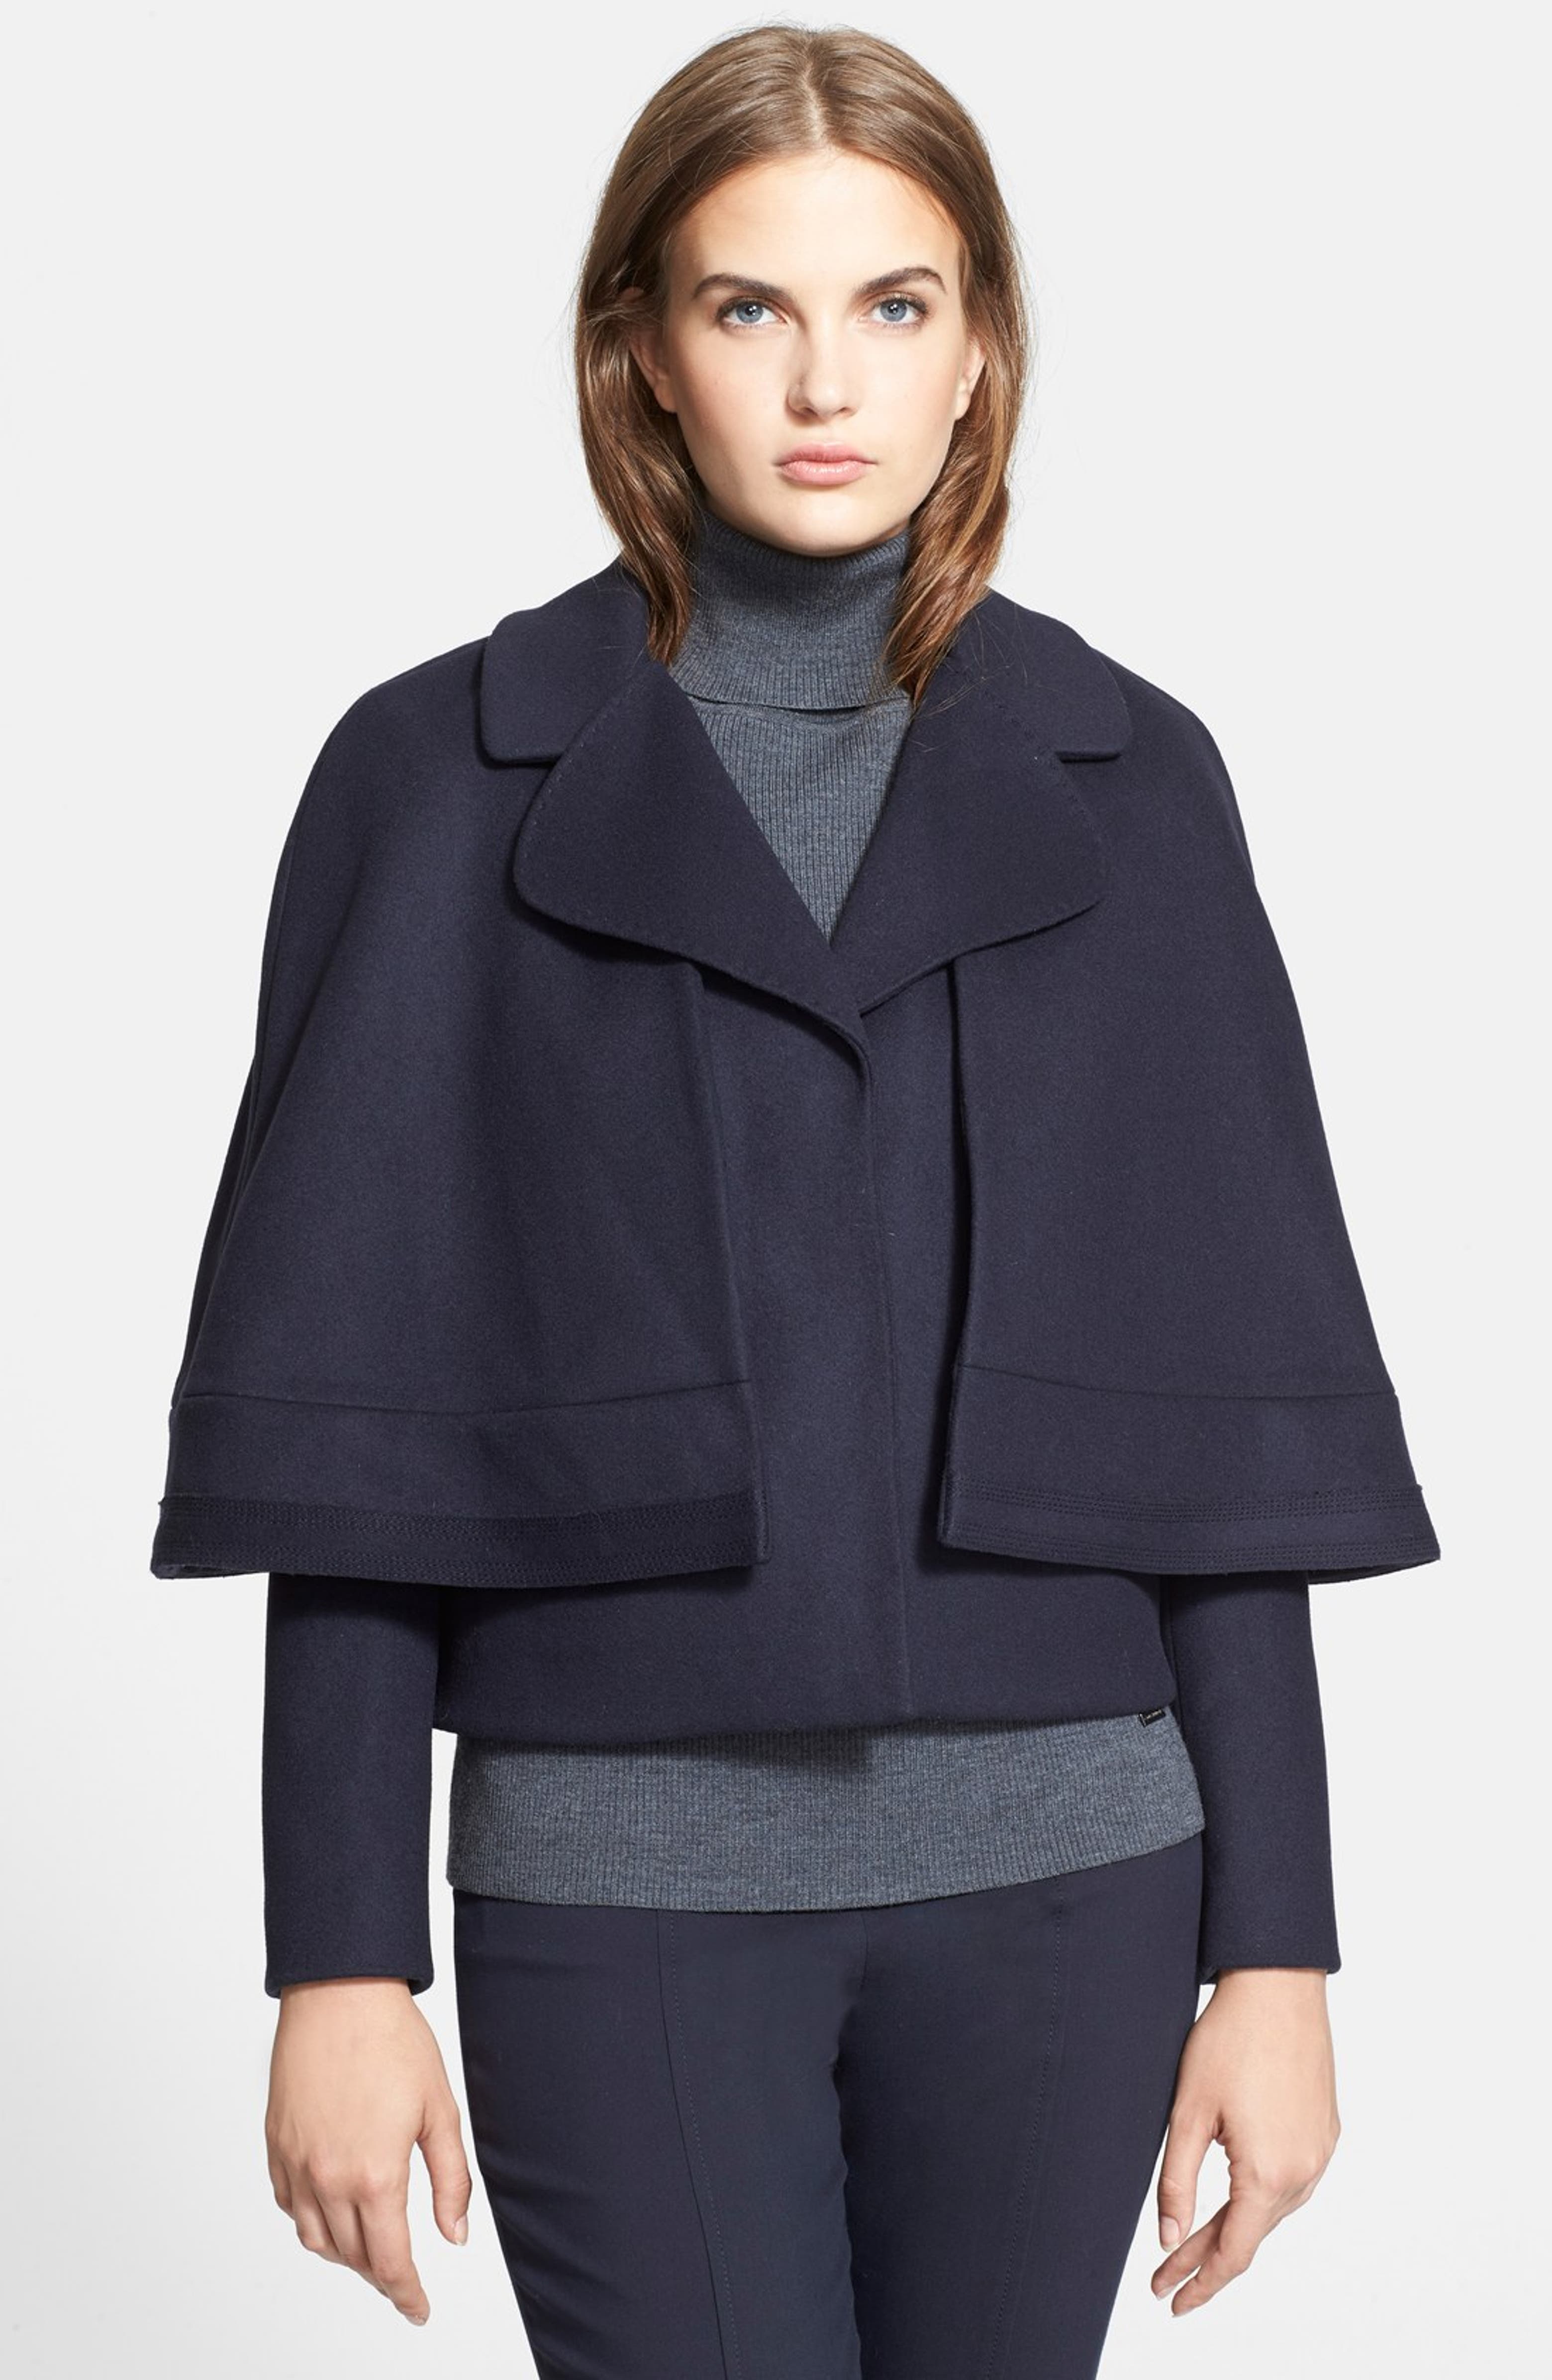 Tory Burch 'Jess' Convertible Cape Jacket | Nordstrom